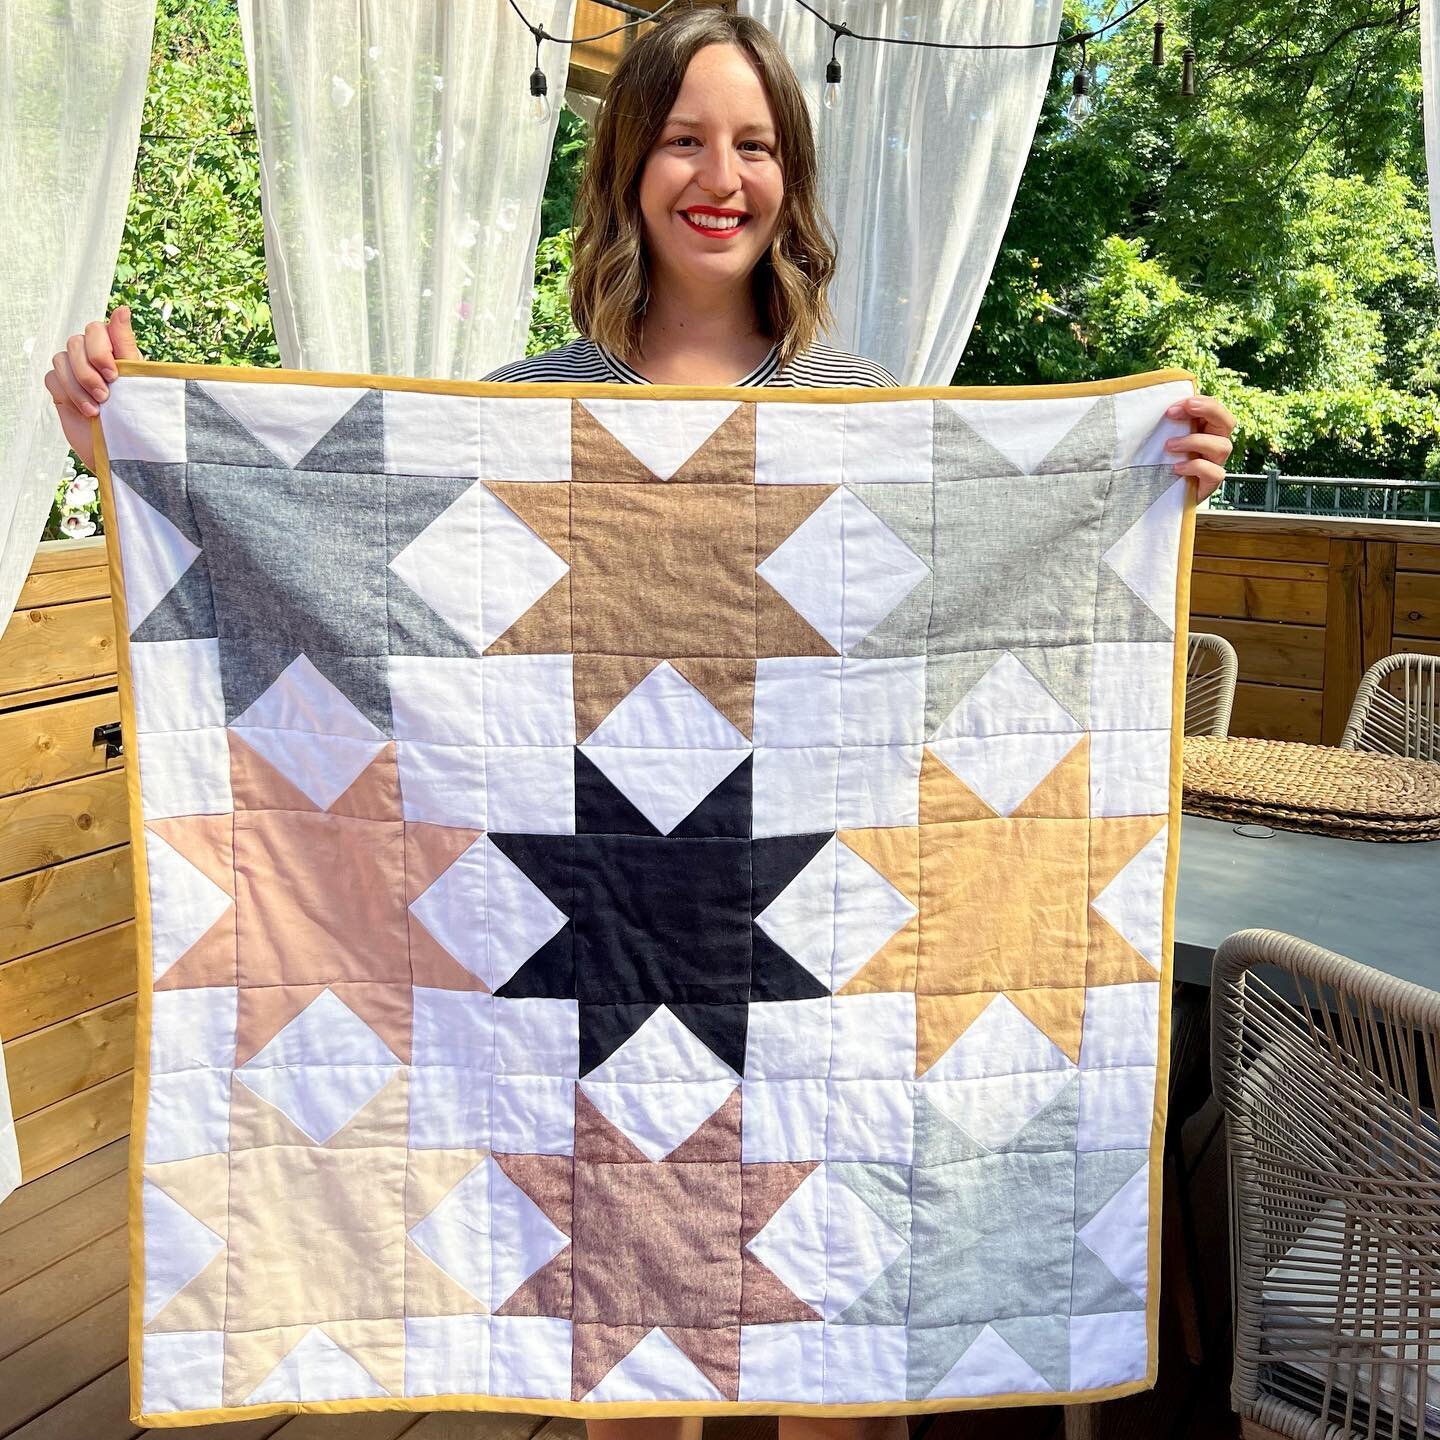 I&rsquo;ve been slowly working away at my first quilt for the past 9 months and finished just in time for bub to get here (any day now 🤞). 

#babyquilt #quilting #essexlinen #sewist #womenwhosew #memade #modernsewing #krystalcreates #makersgonnamake